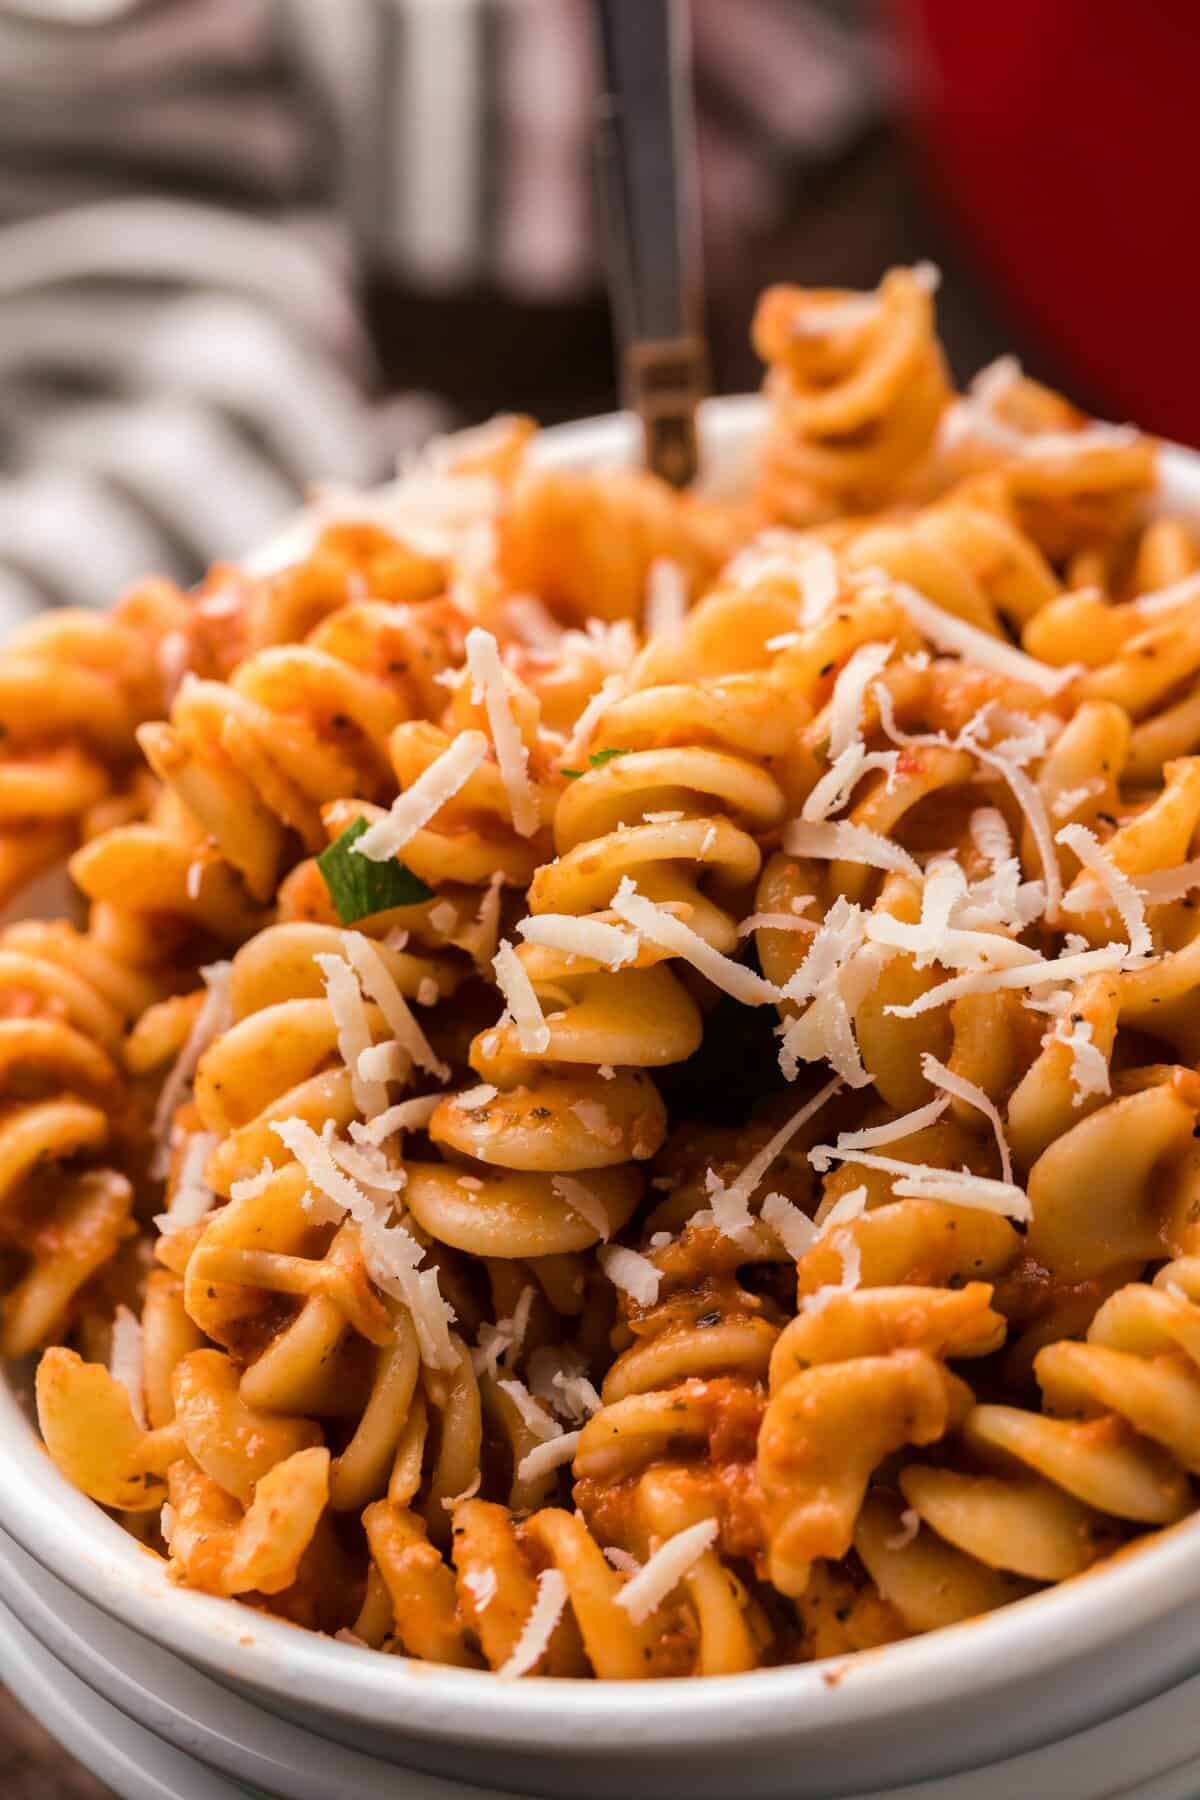 up close photo of the spicy fusilli pasta in a white bowl.